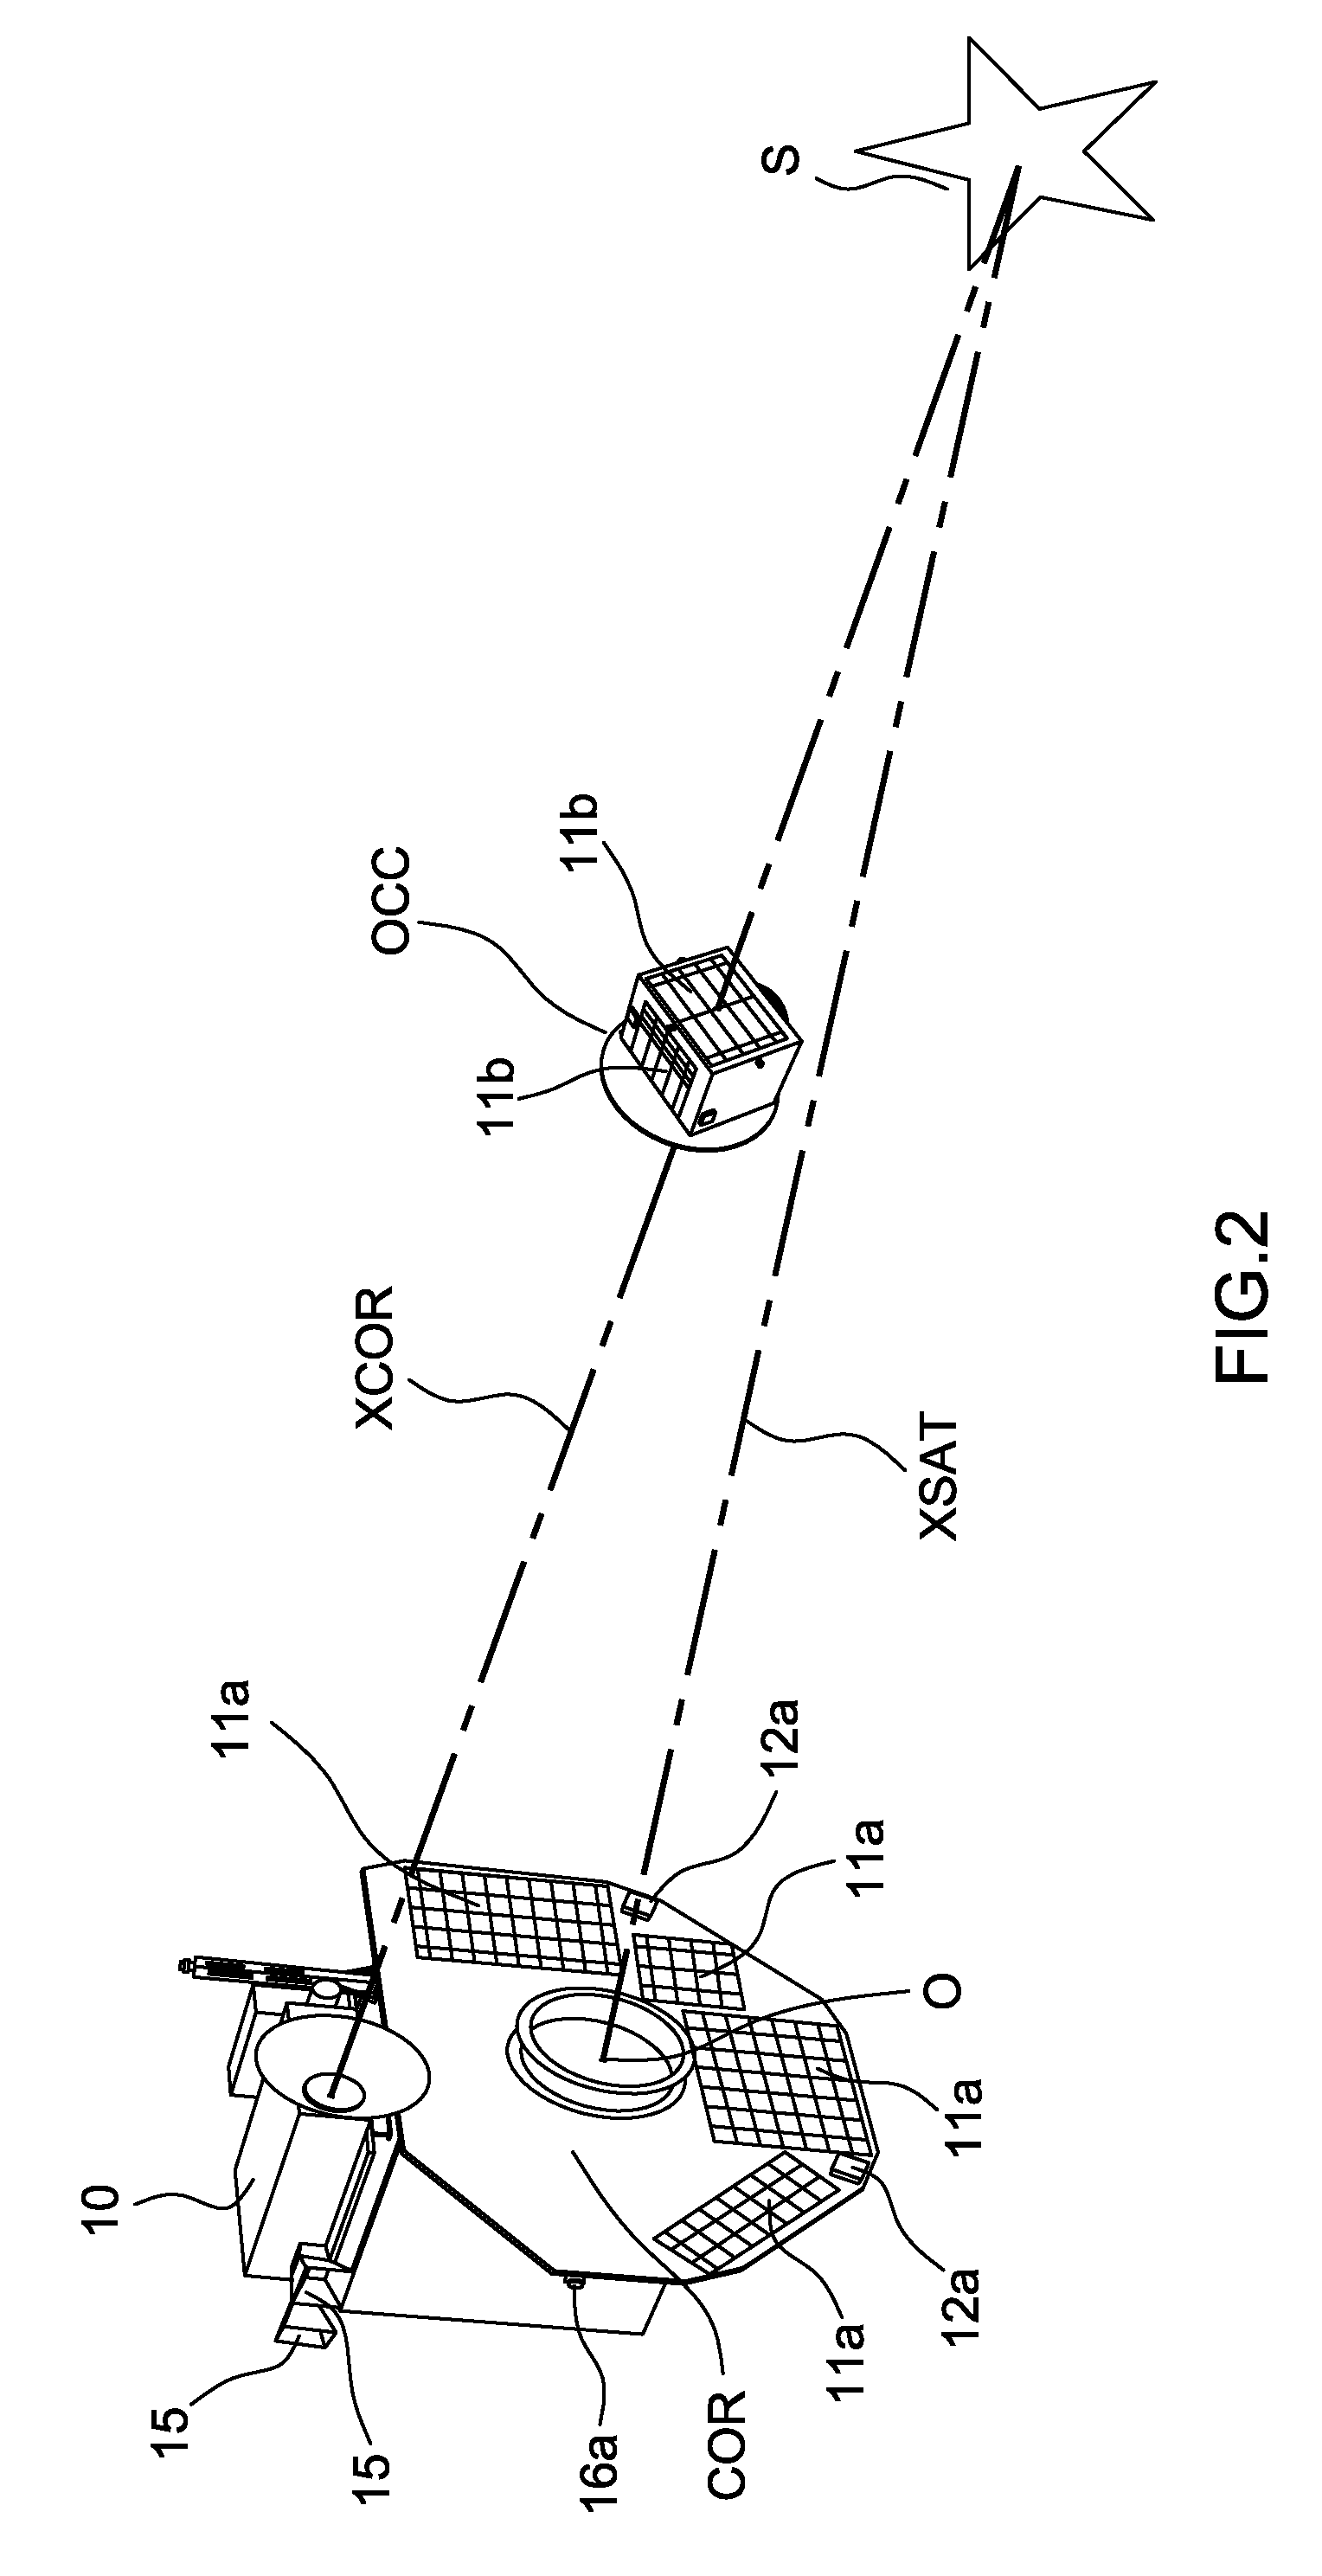 Formation flight device intended for a solar coronagraphy mission